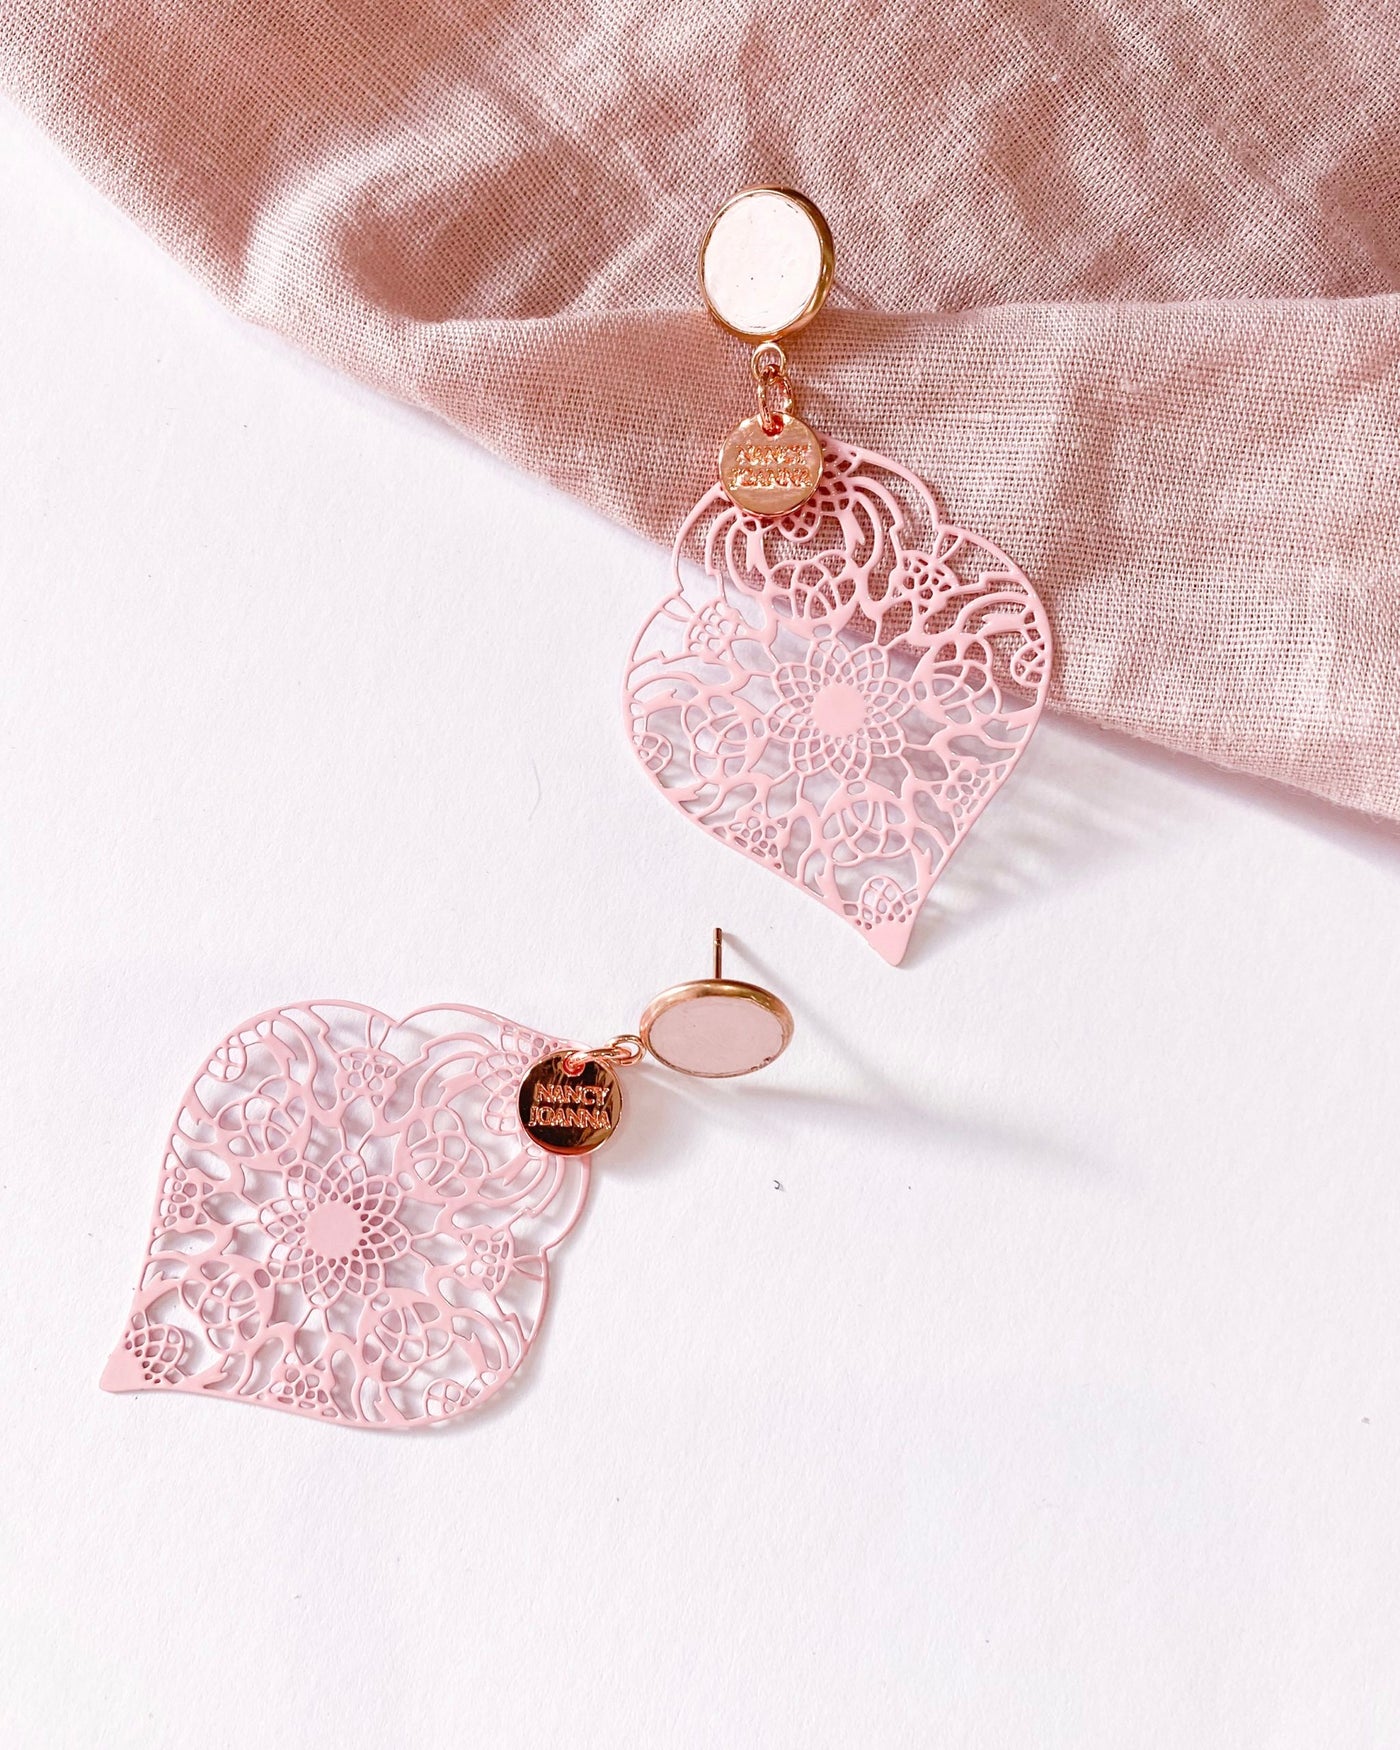 Blush Concrete with Pink Lace Earrings Nancy Joanna